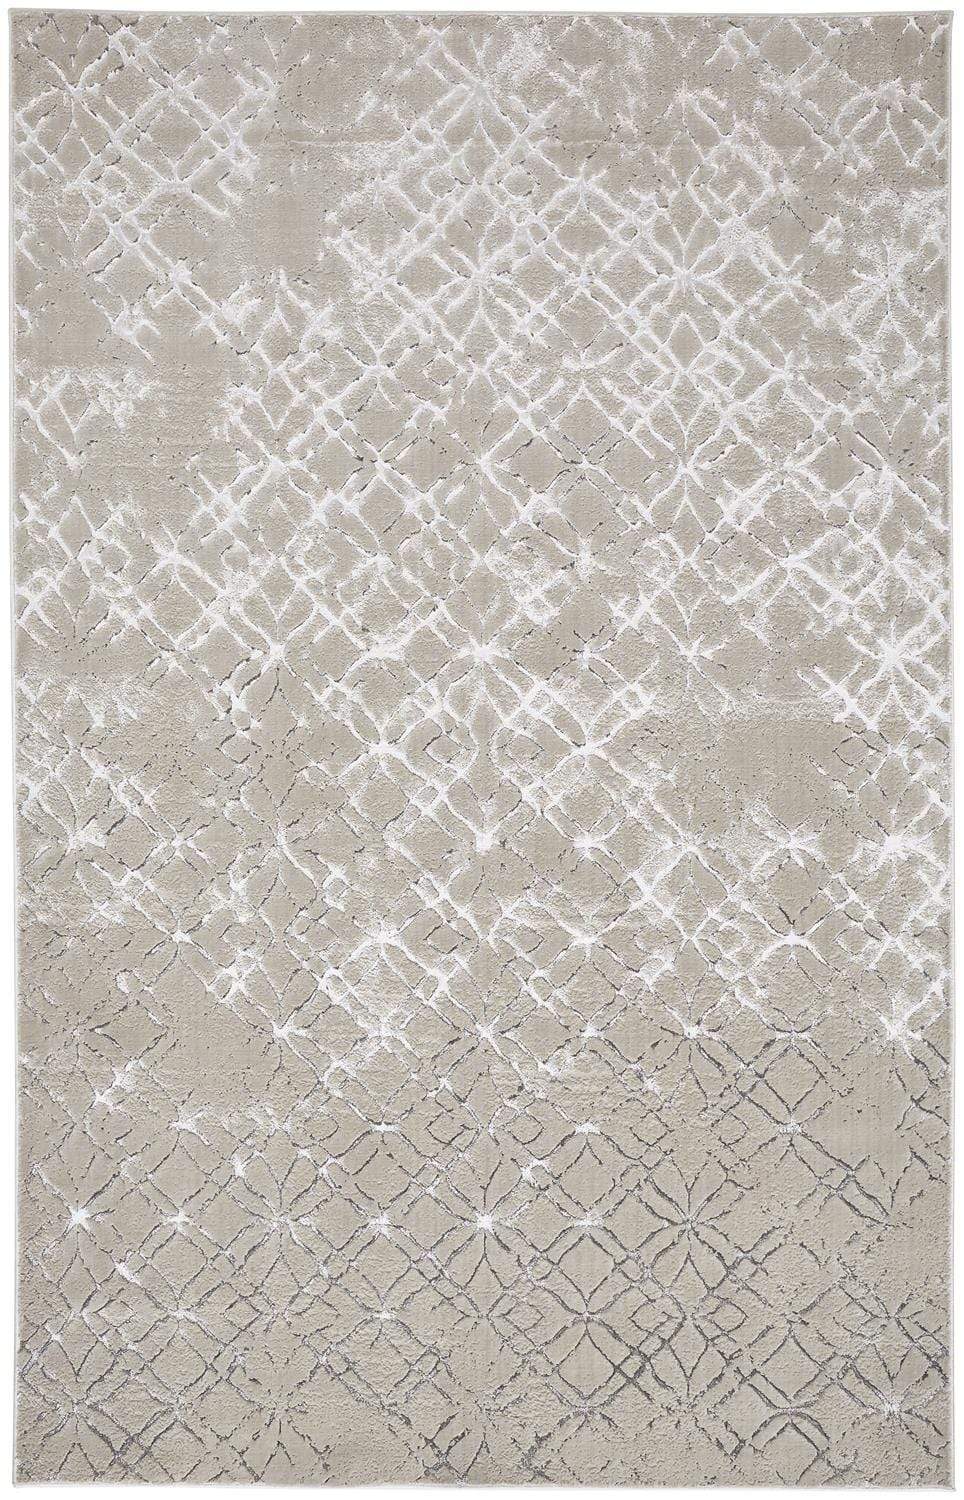 Feizy Feizy Micah Modern Metallic Trellis Rug - Available in 6 Sizes - Ivory Bone & Silver 5' x 8' 6943047FBGESLVE10